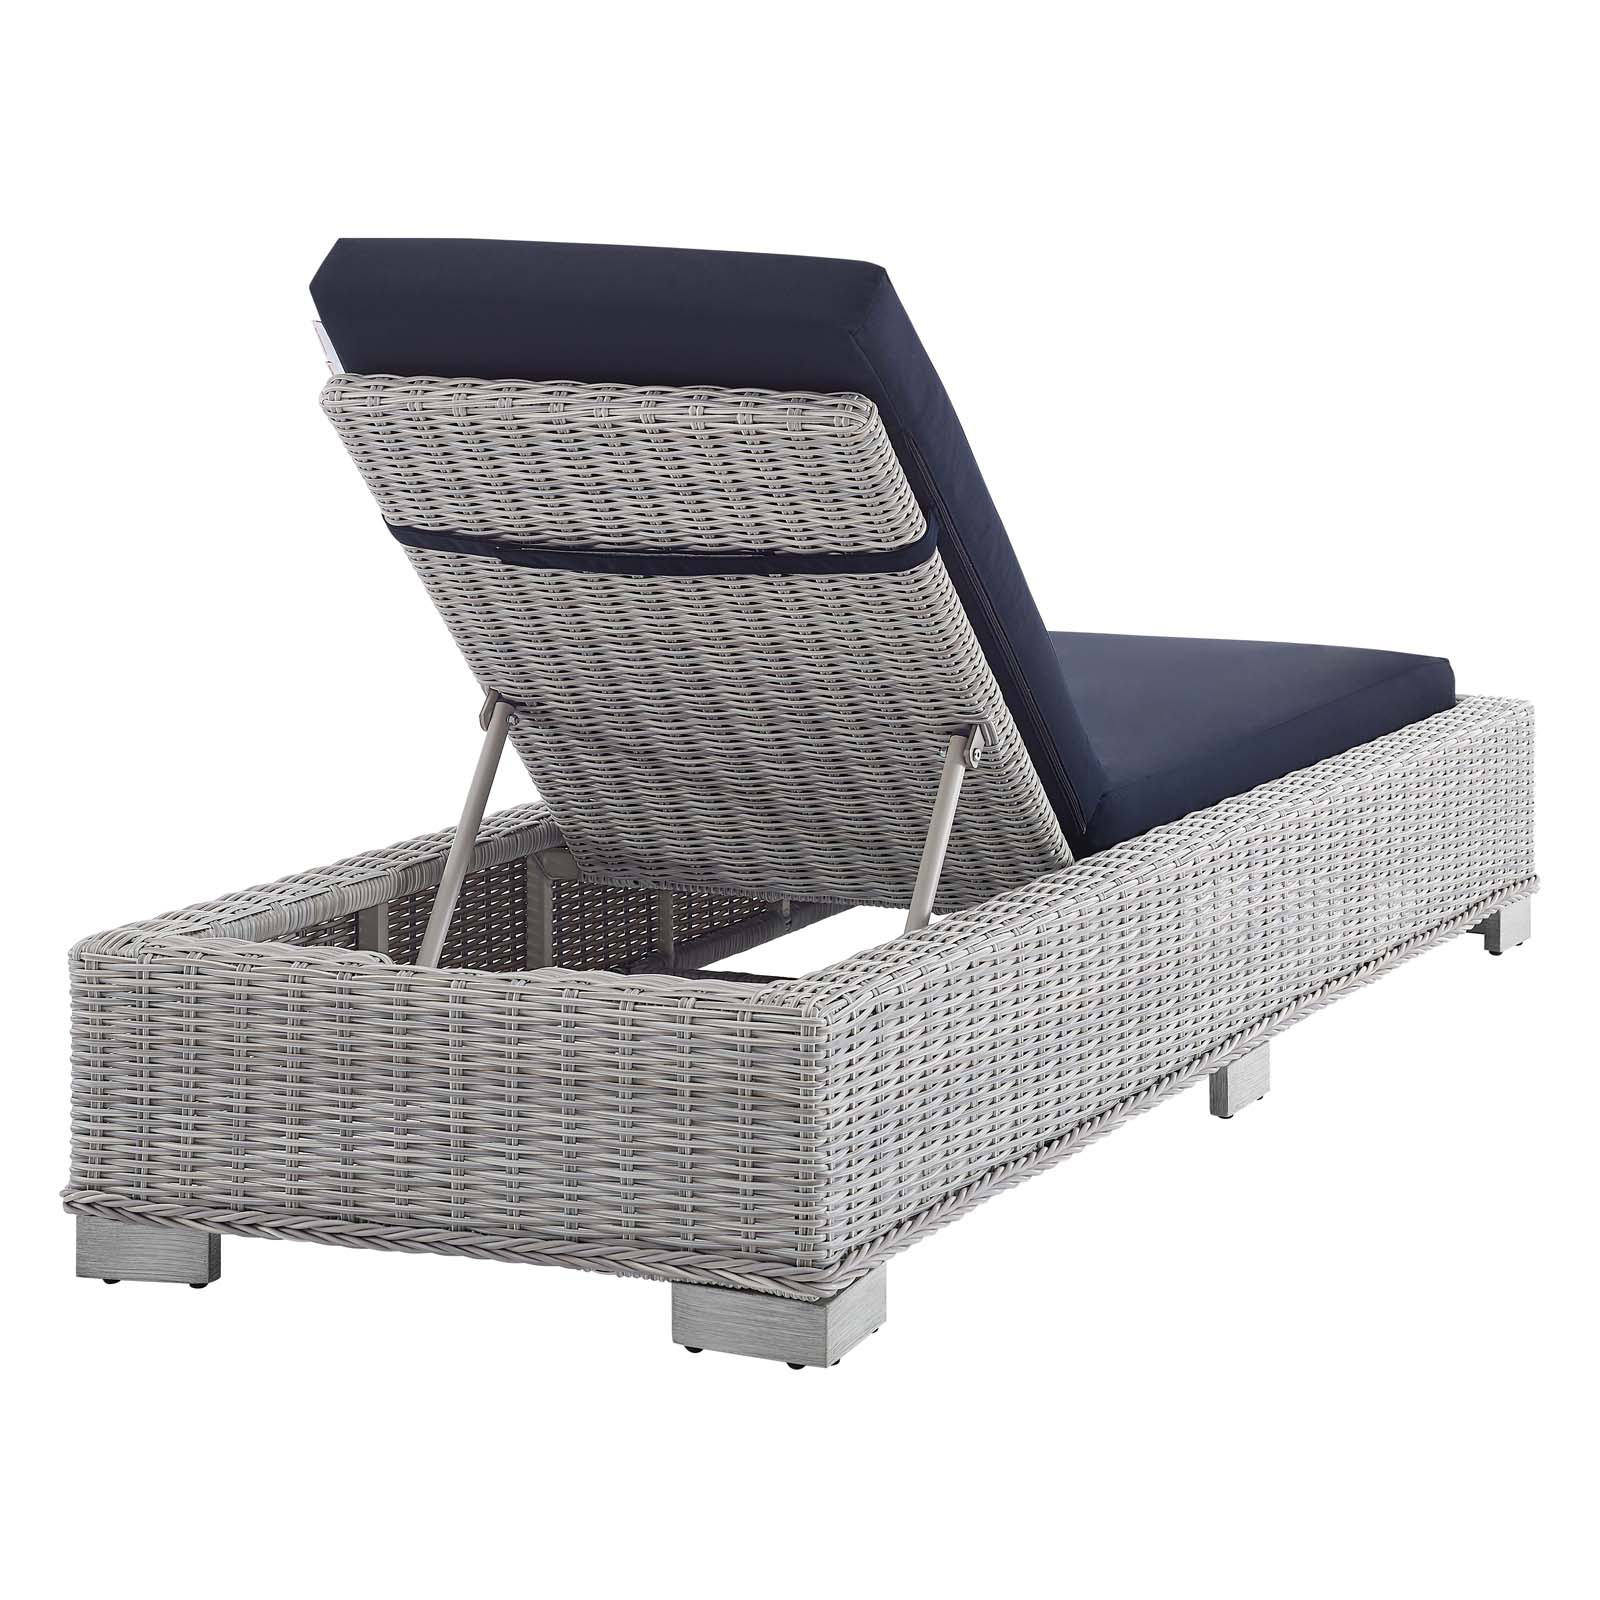 Modway Conway Sunbrella? Outdoor Patio Wicker Rattan Chaise Lounge in Light Gray Navy - image 5 of 10